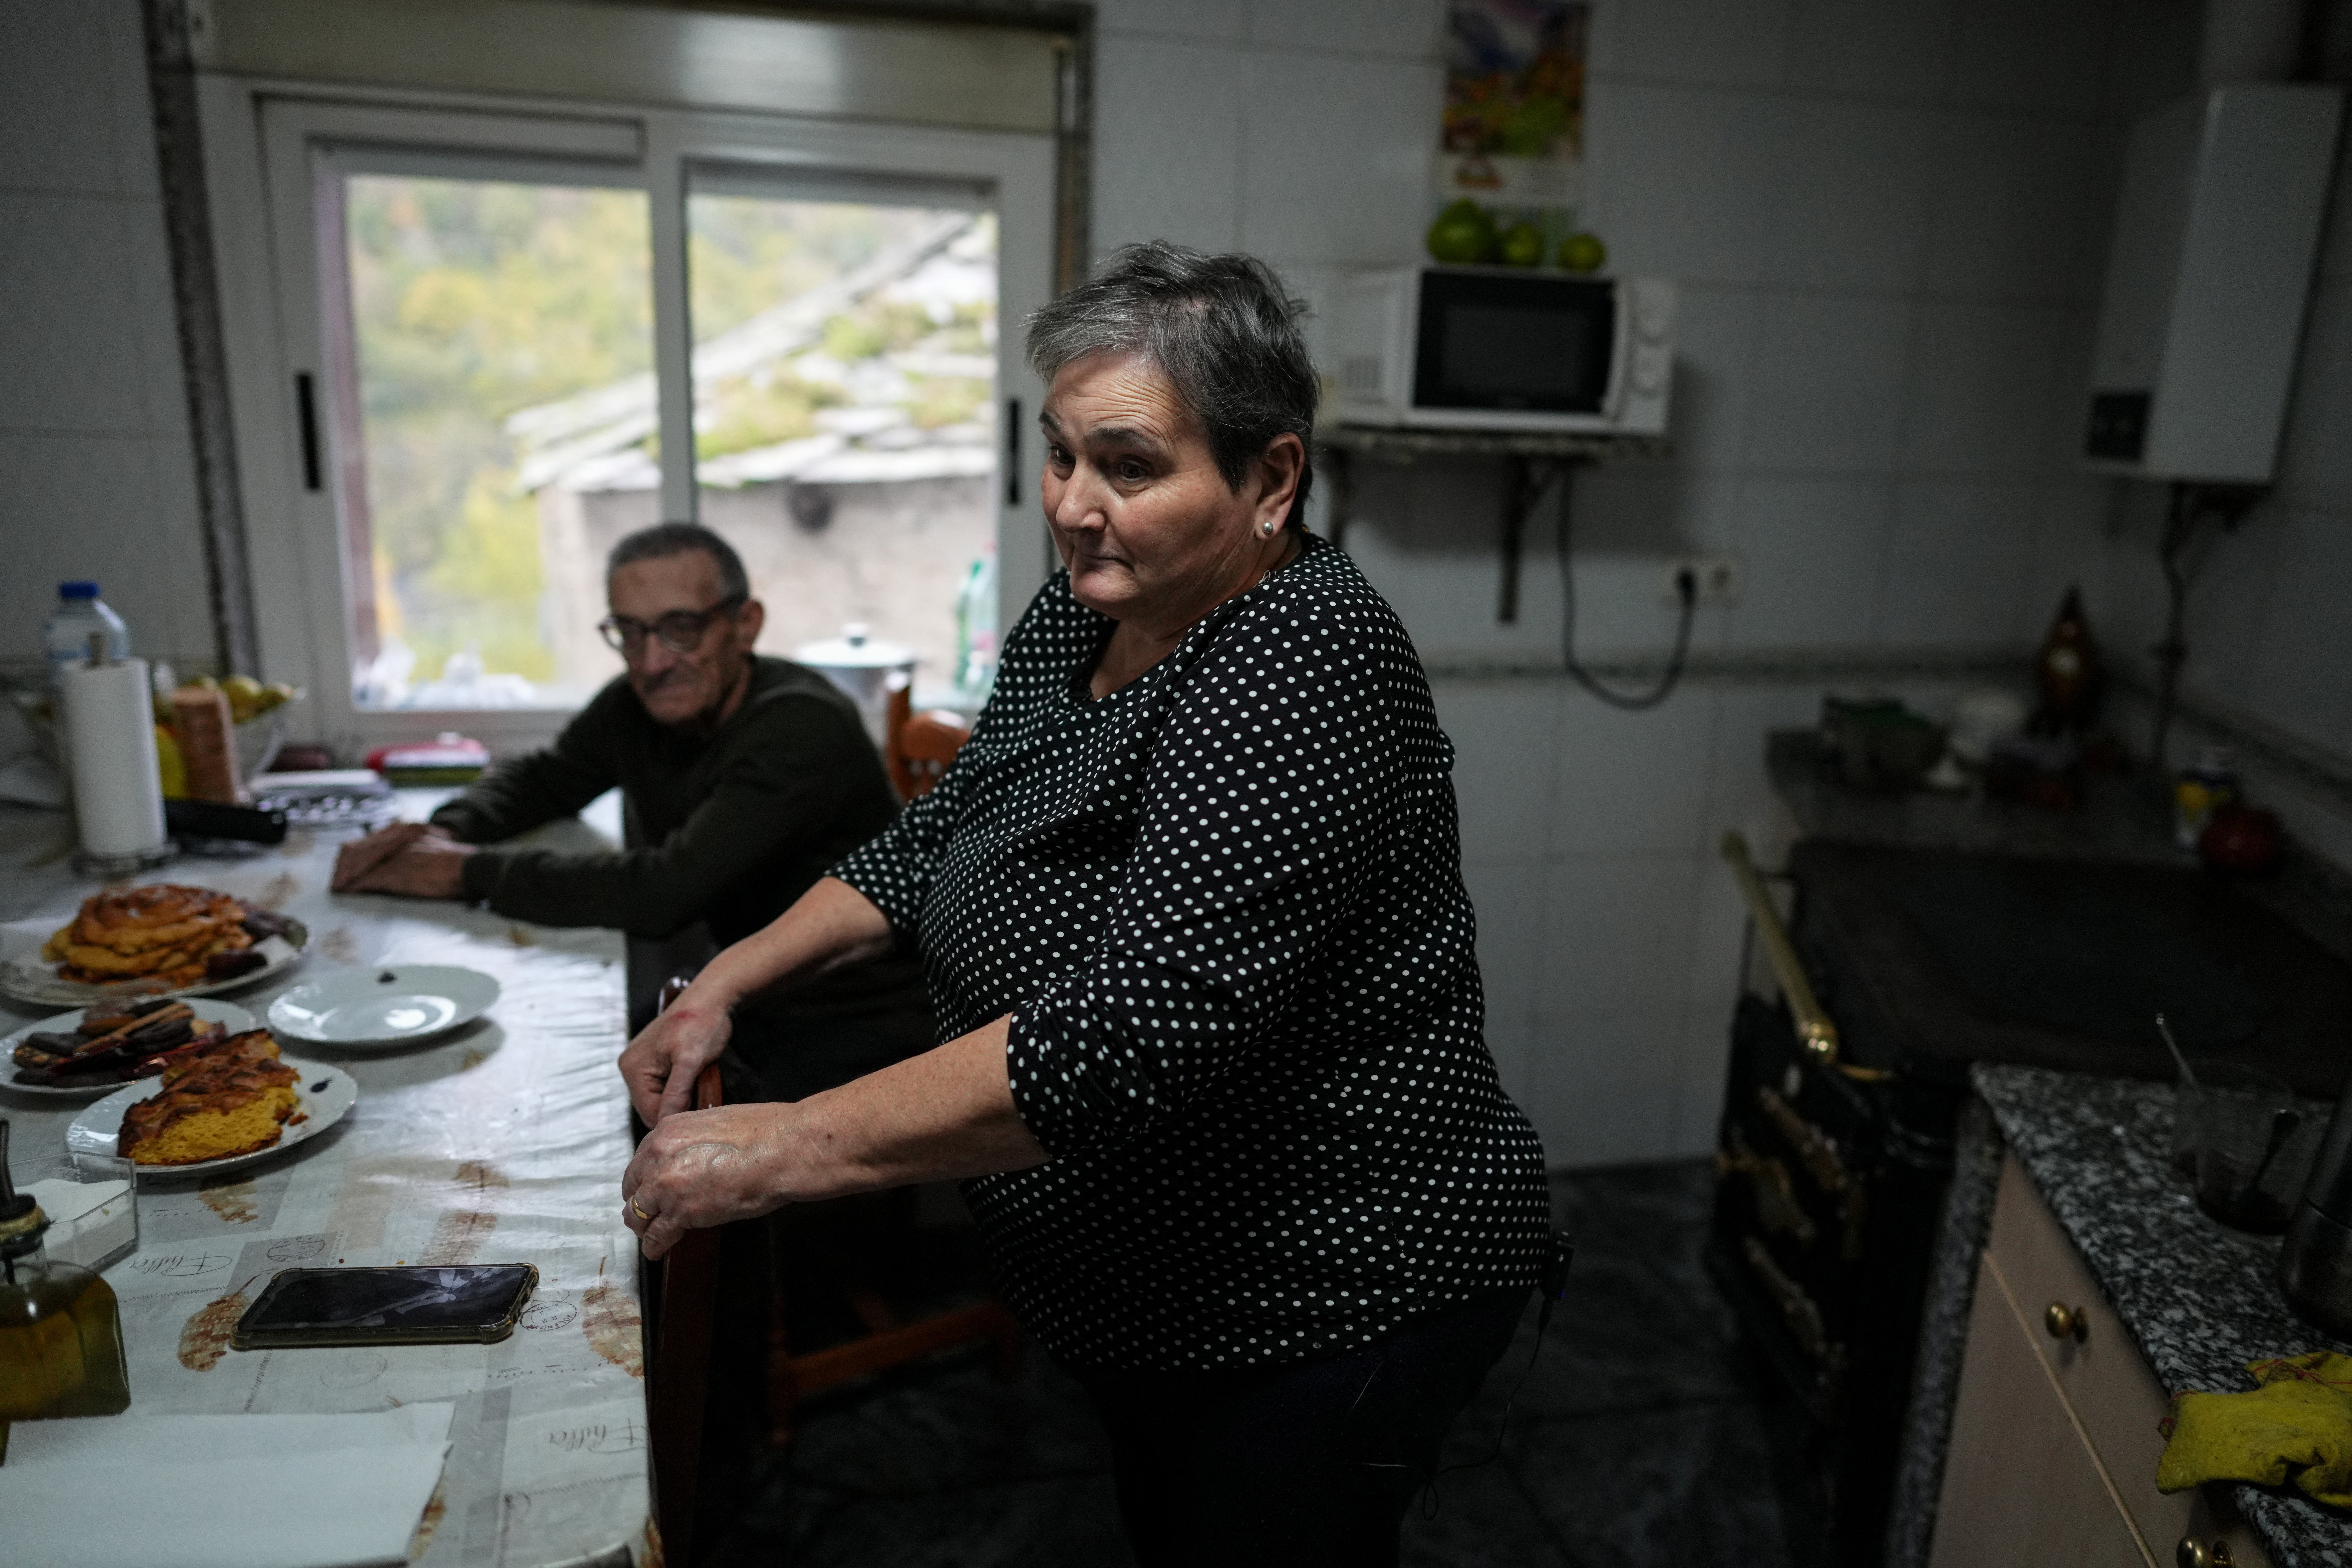 Angeles Orallo and her husband Valentin Ruiz Barreiro, who are struggling with the rising bear population, at their home in Villarino